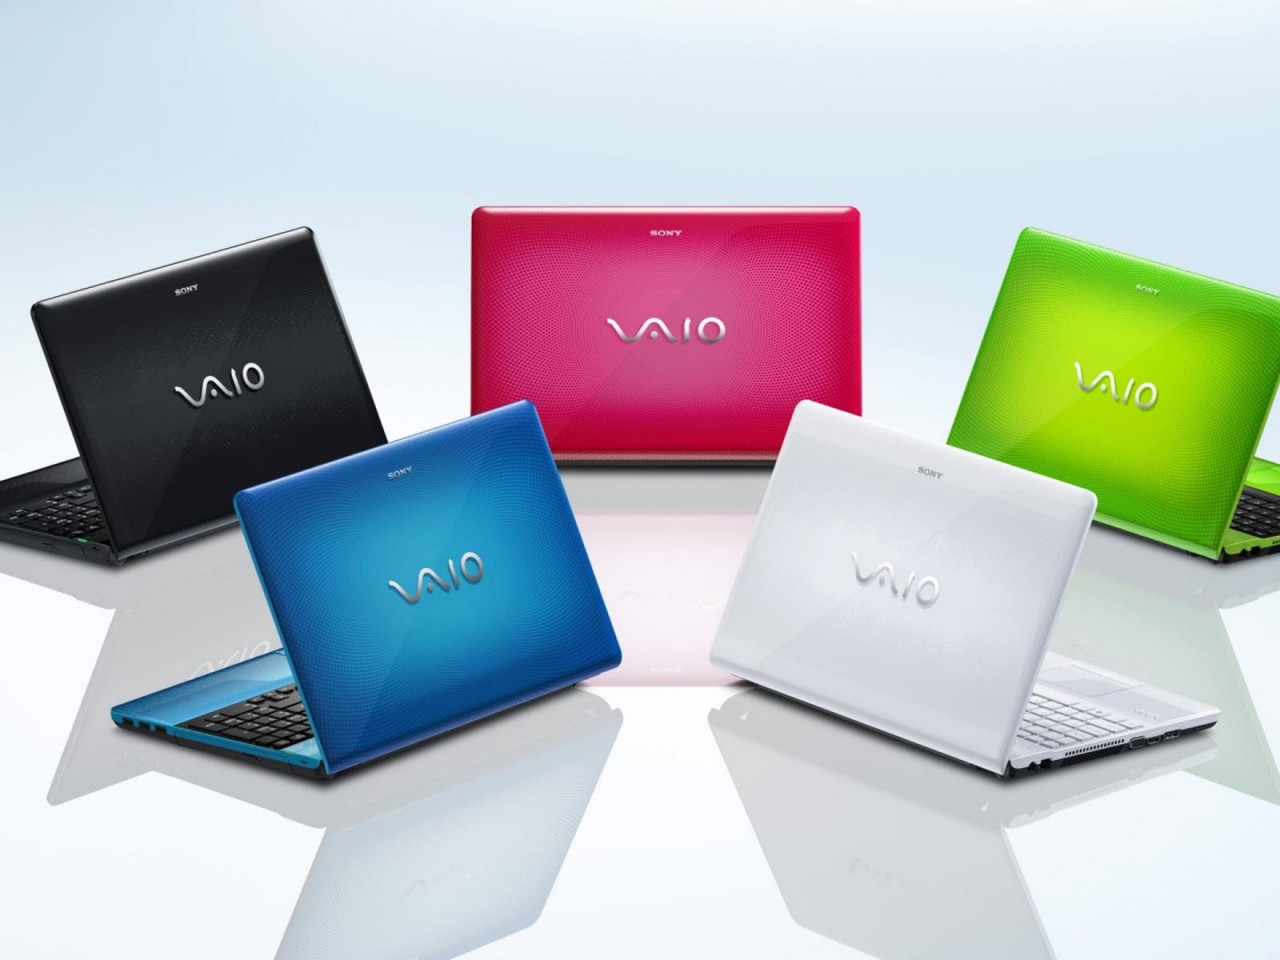 Colorful Sony Vaio Laptops backgrounds